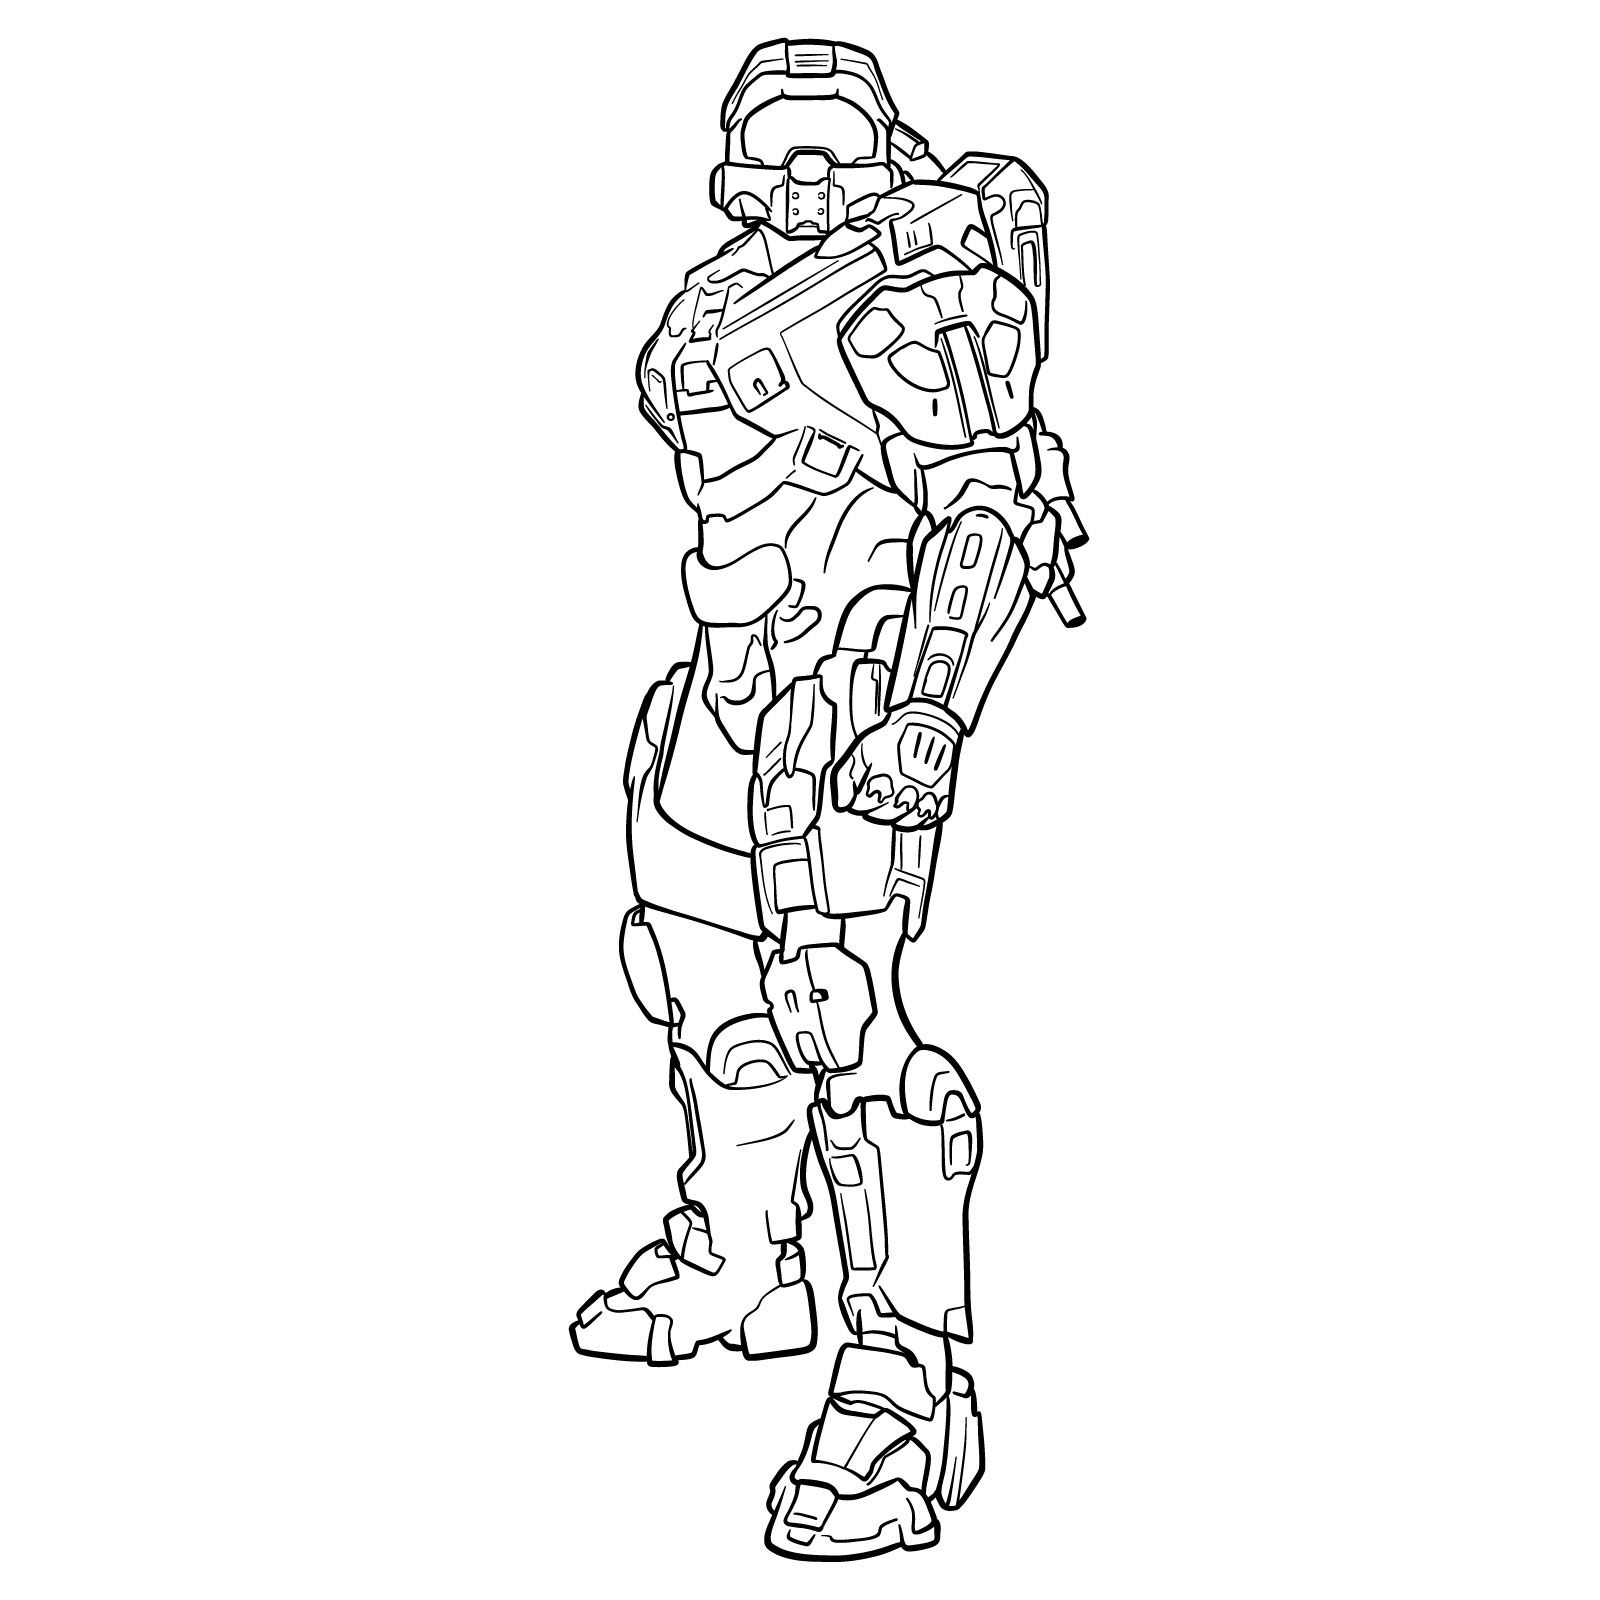 How to Draw Master Chief Petty Officer John-117 - final step